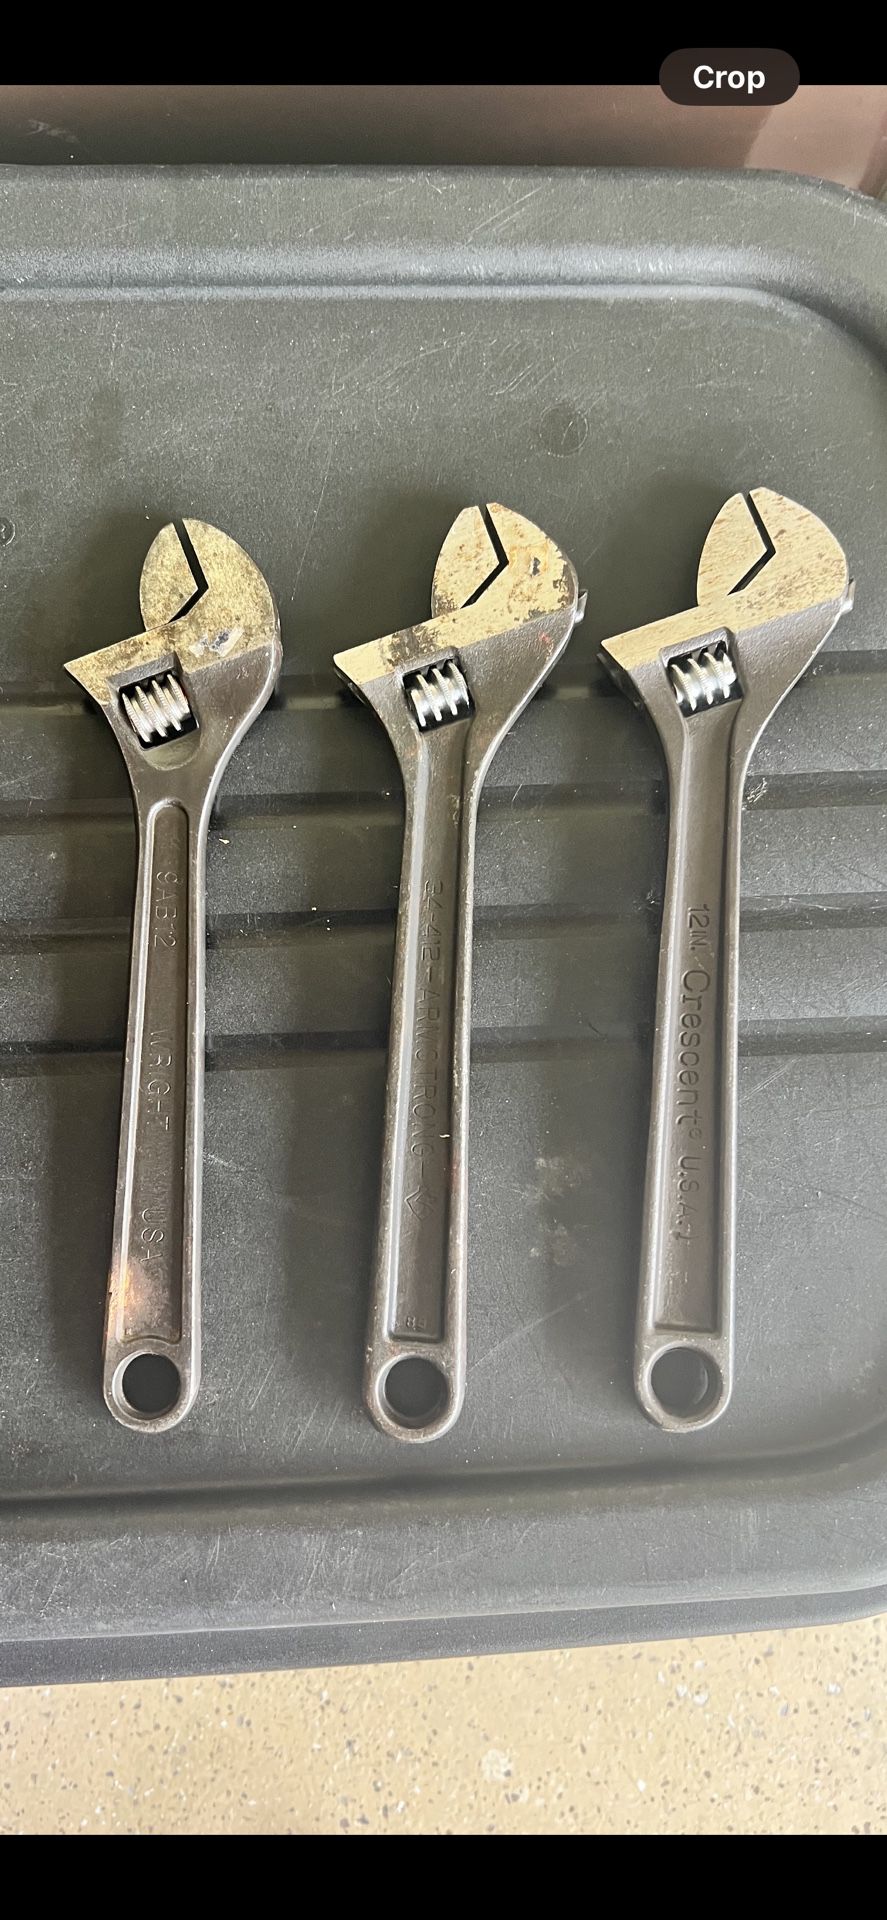 3 Adjustable Wrenches 12" One Is Crescent Brand 